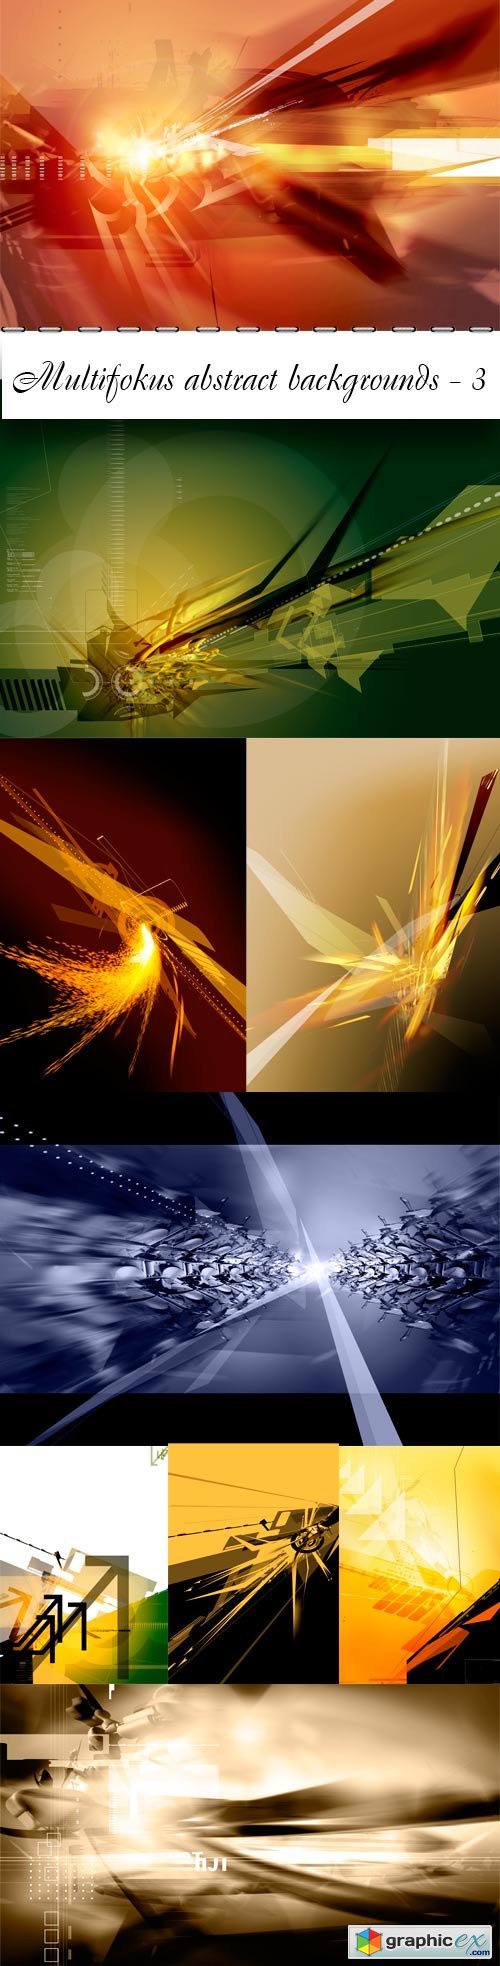  Multifokus abstract backgrounds PSD - 3